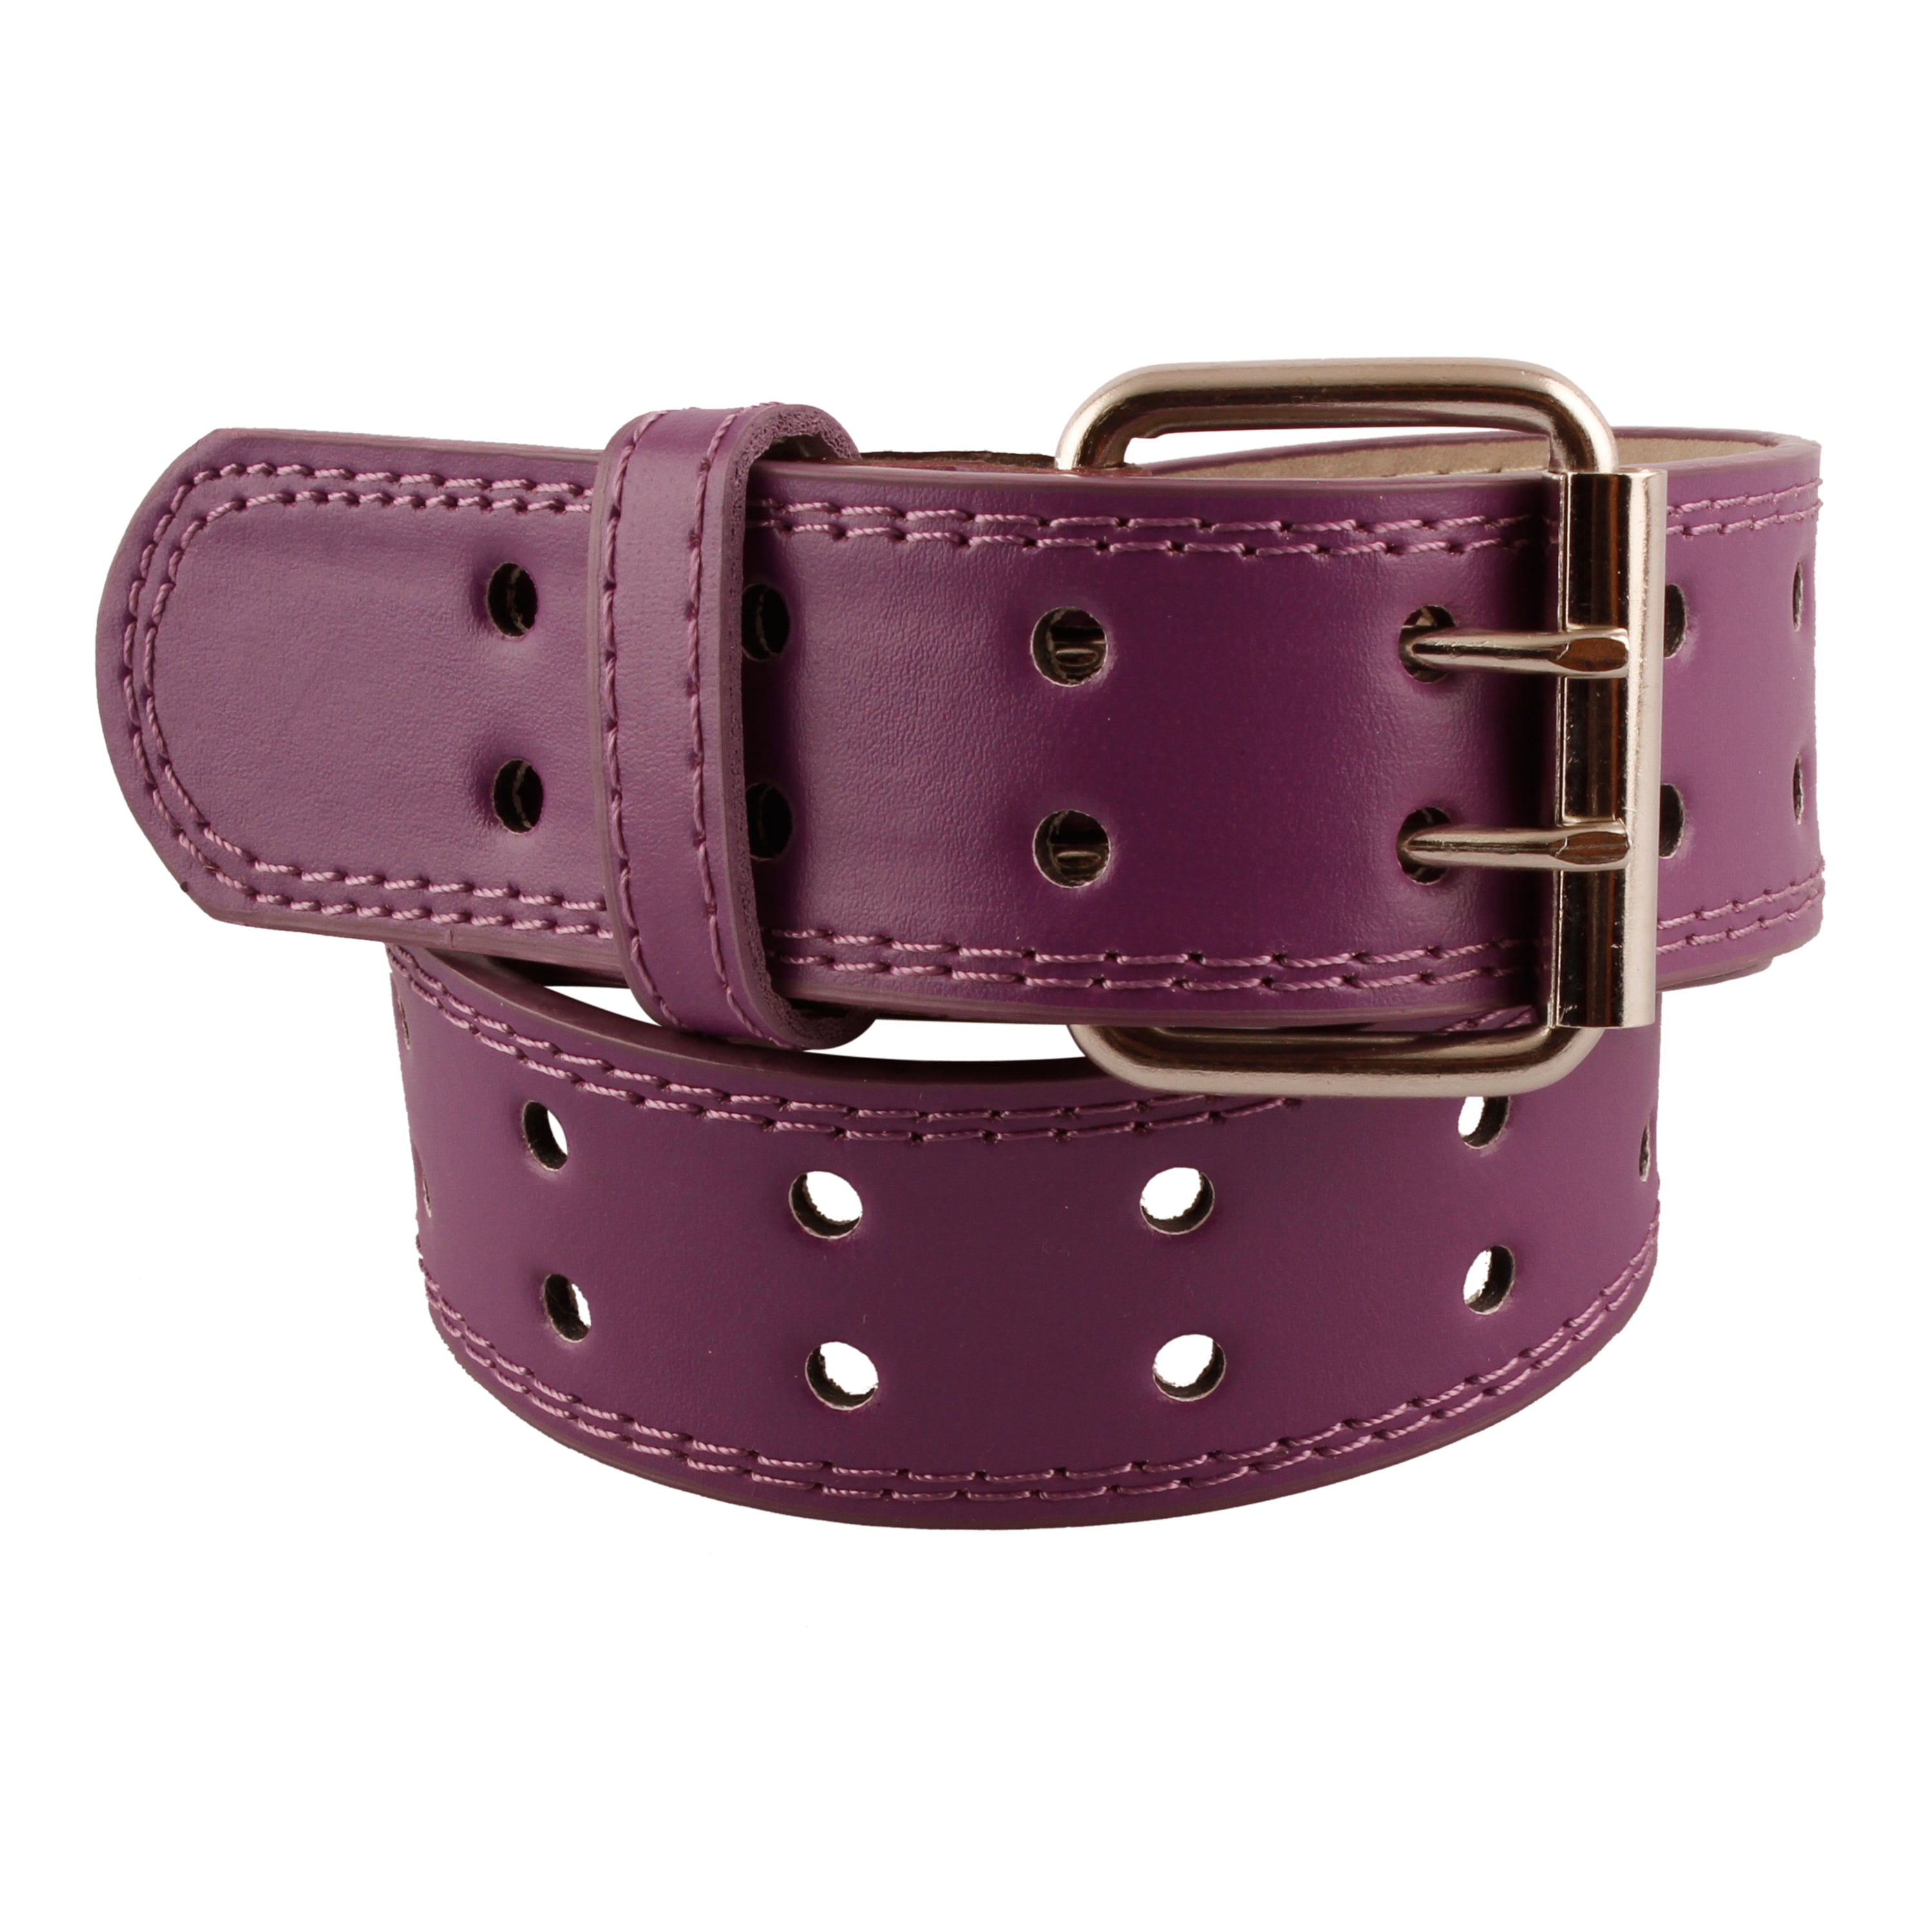 Available from Small to Extra Large Kids Two-Hole Belt Faux Leather 